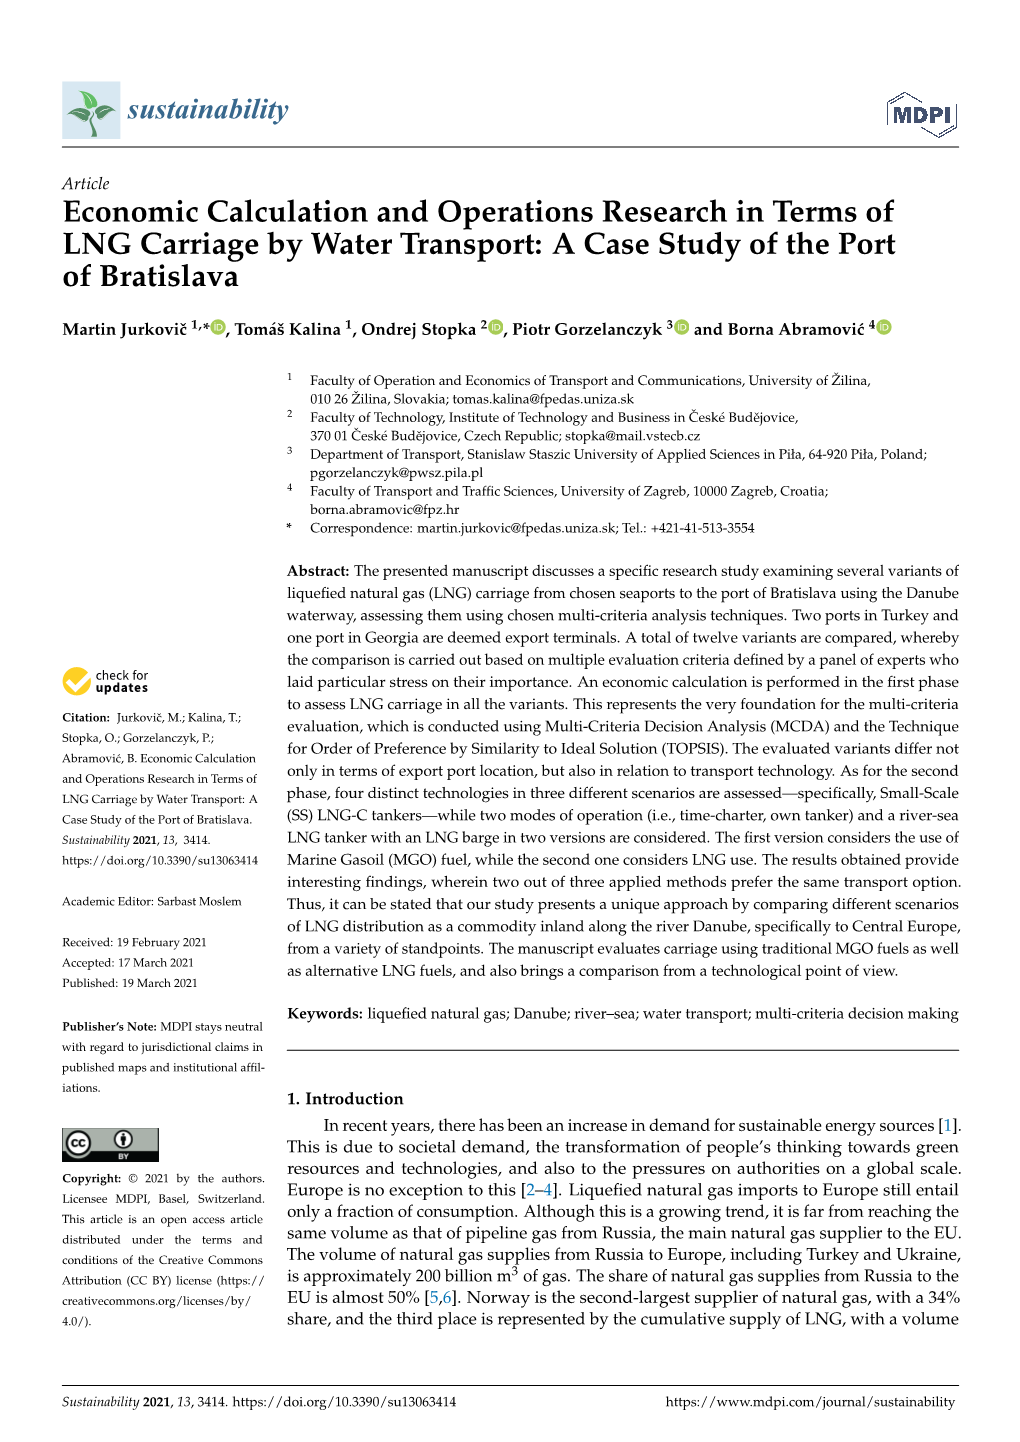 Economic Calculation and Operations Research in Terms of LNG Carriage by Water Transport: a Case Study of the Port of Bratislava